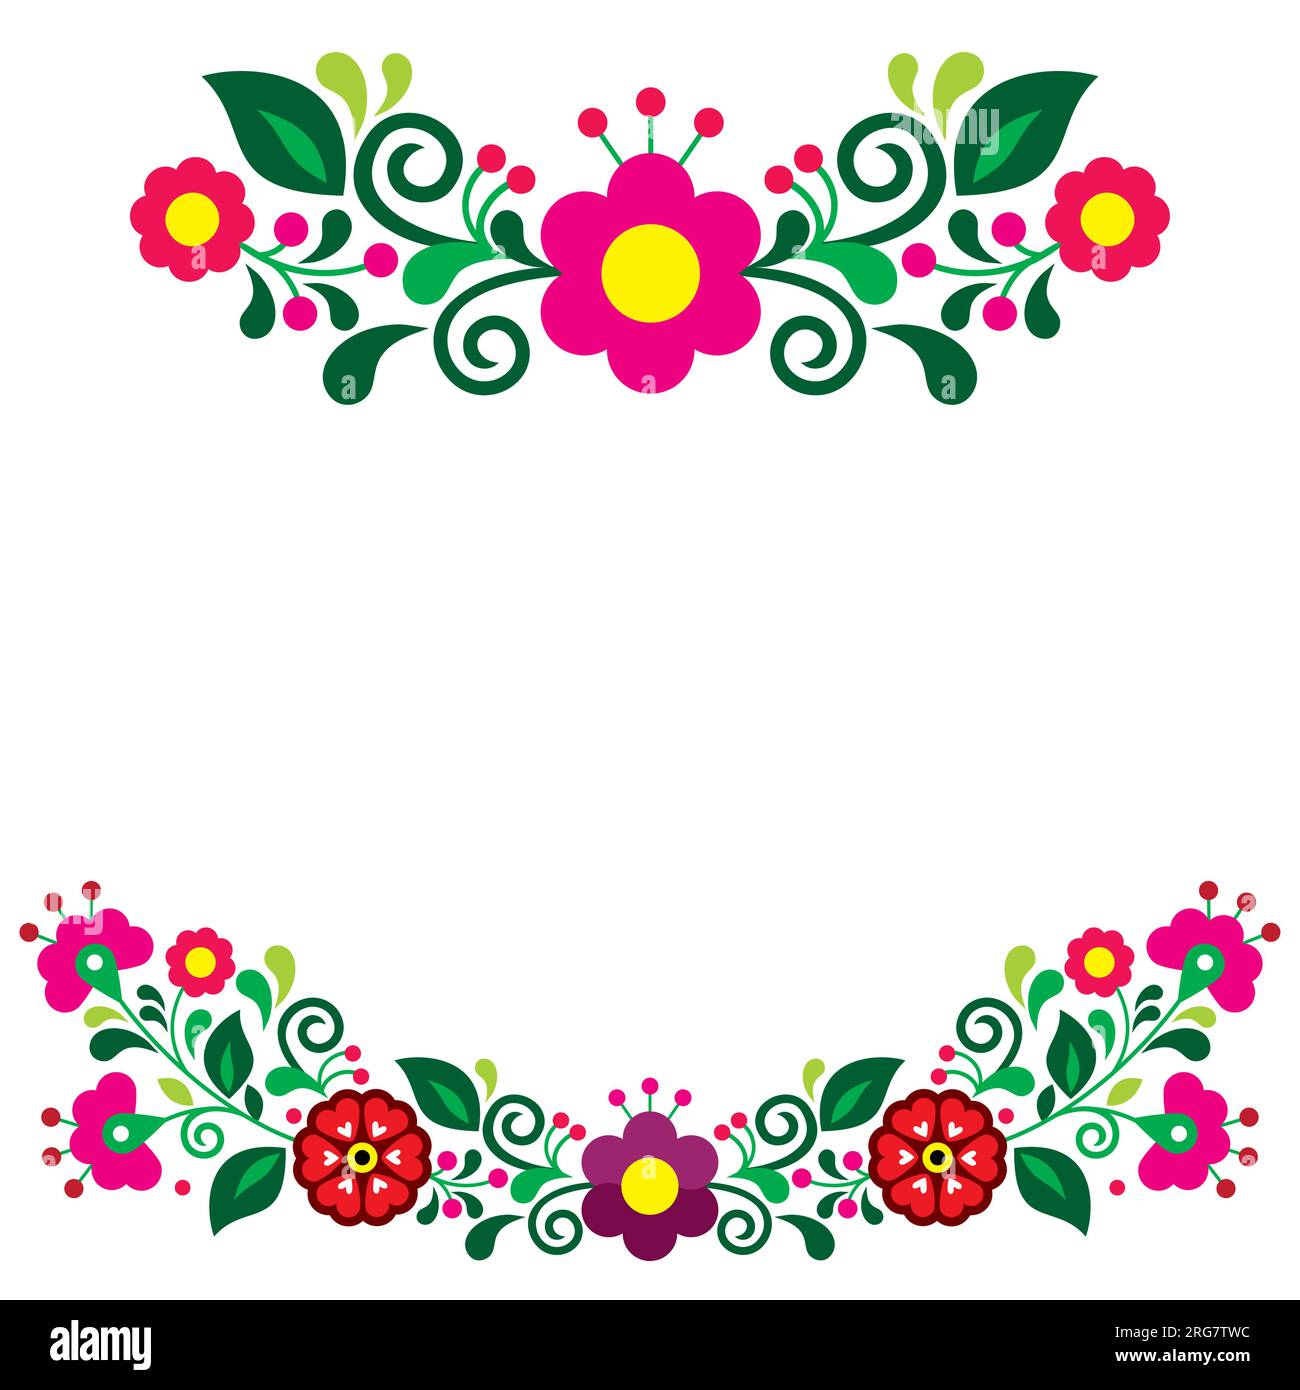 Mexican folk art style vector floral greeting card design elements, retro vibrant patterns set inspired by traditional embroidery from Mexico Stock Vector